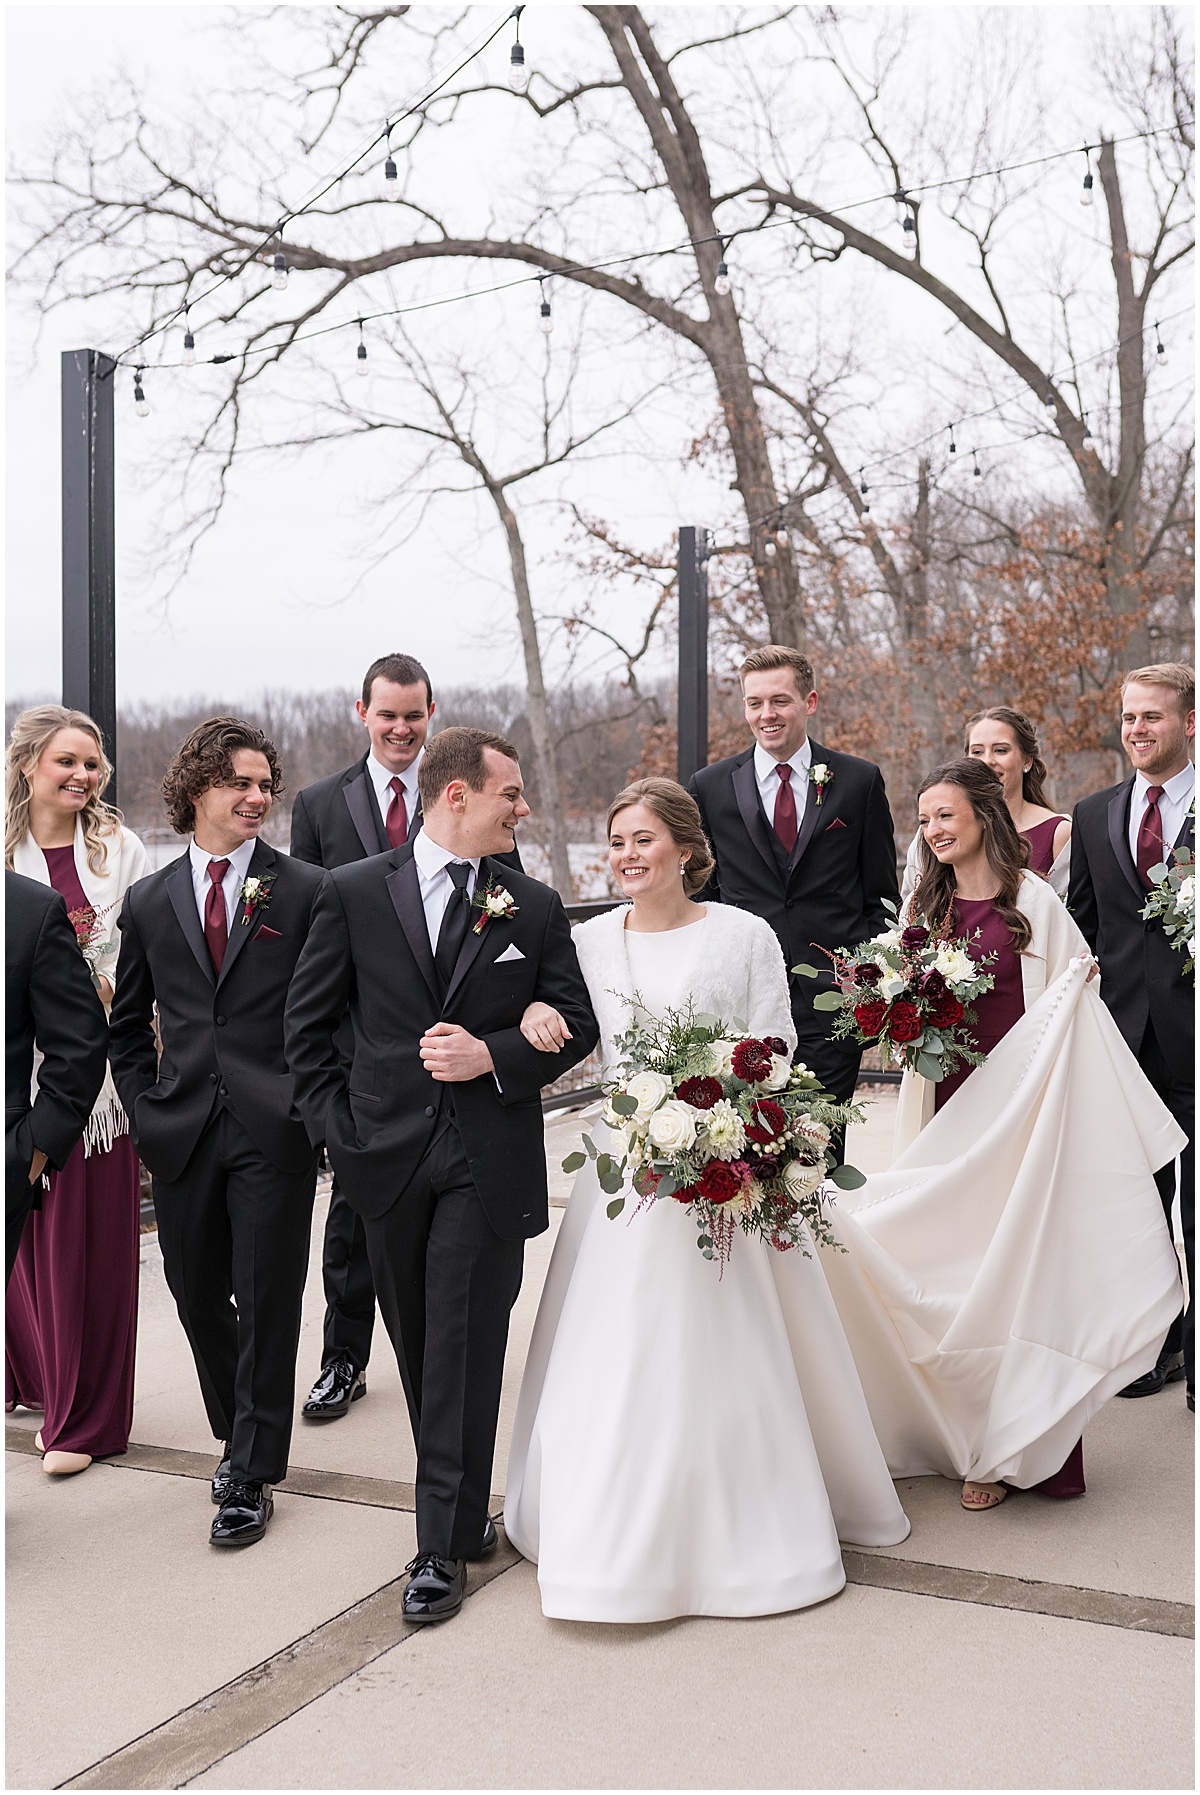 Bride and groom walk with bridal party at Allure on the Lake wedding in Chesterton, Indiana